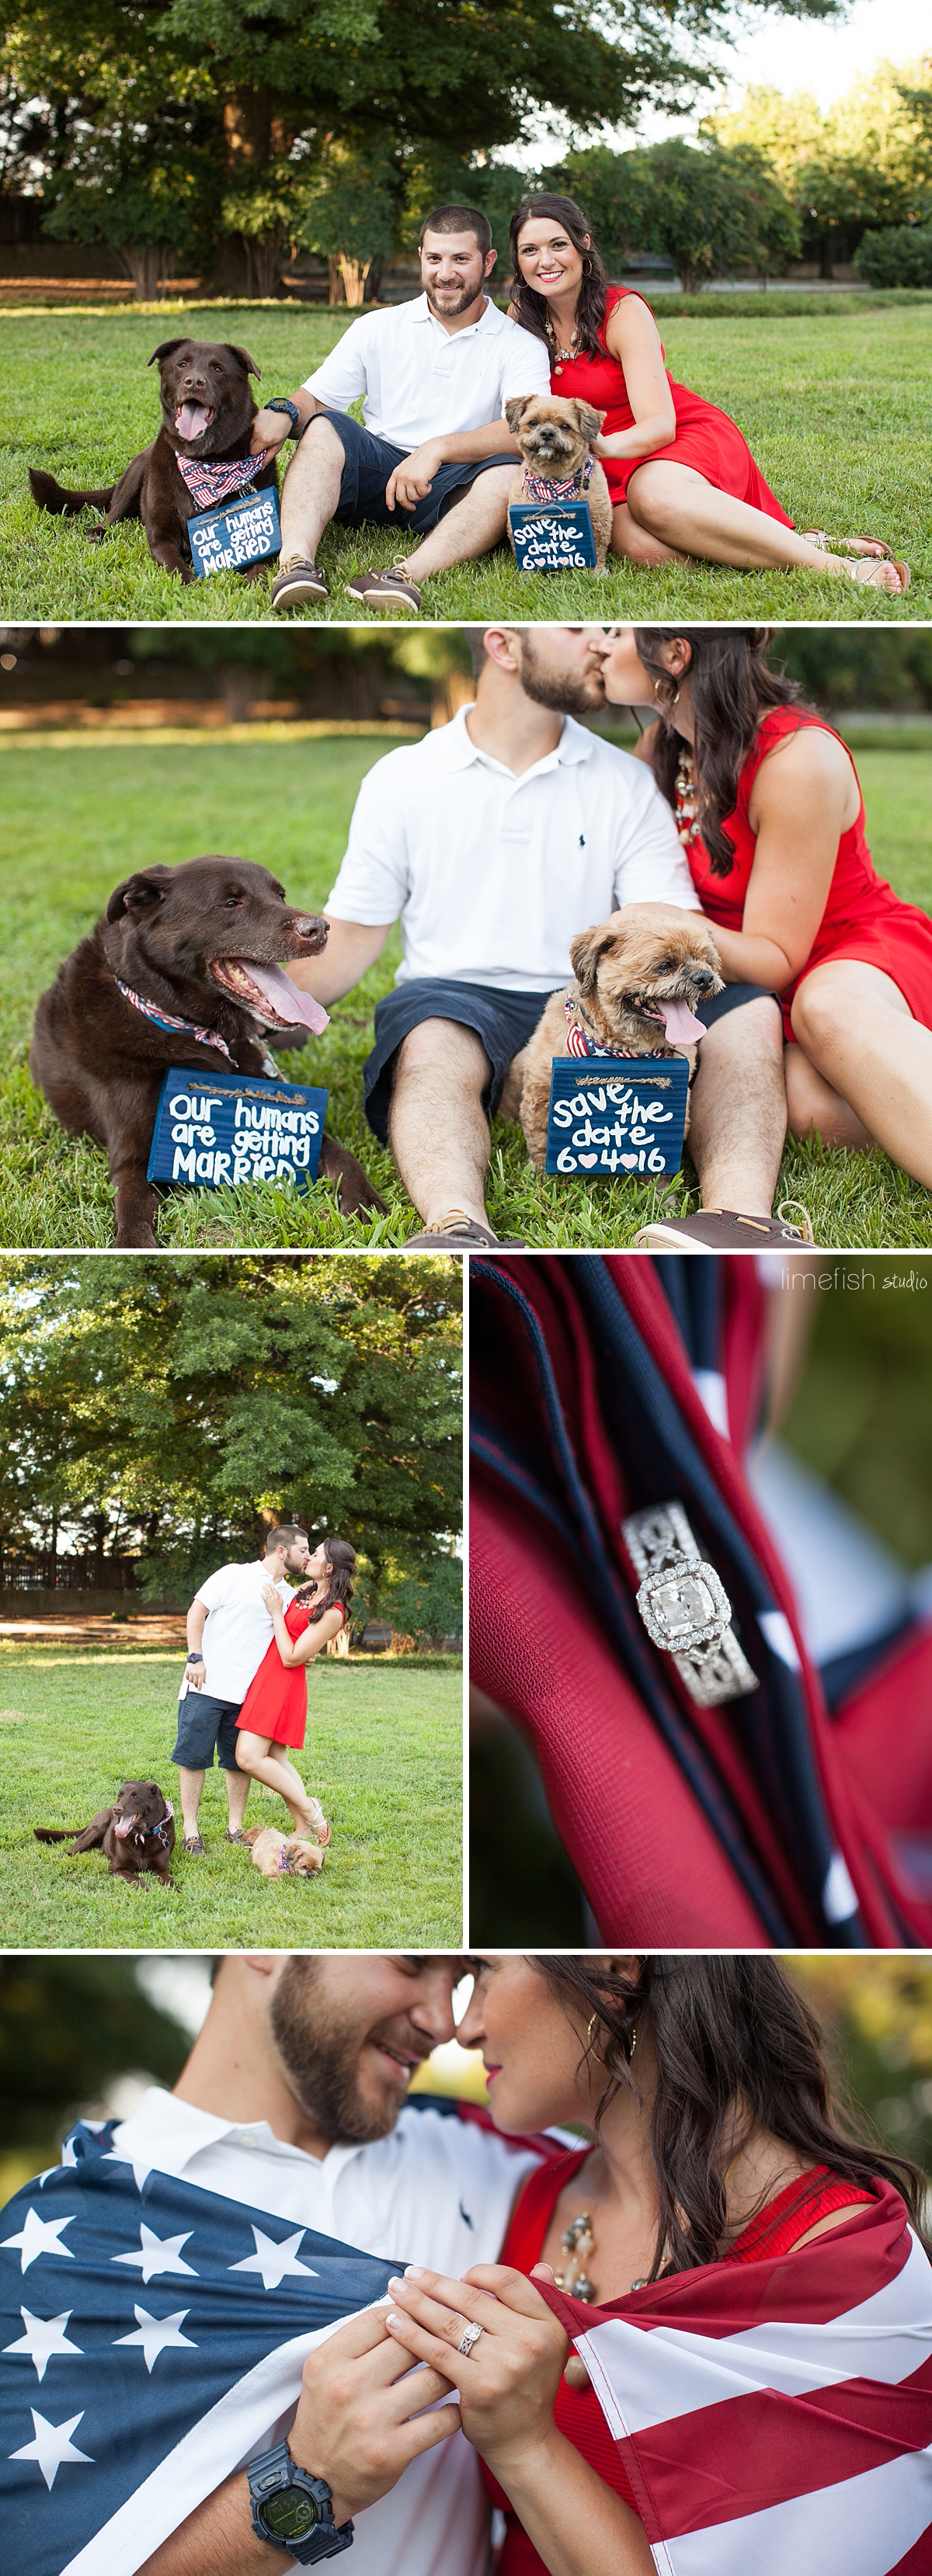 Old Town Alexandria Red, White, Blue Engagement Session by Limefish Studio Photography | Northern Virginia